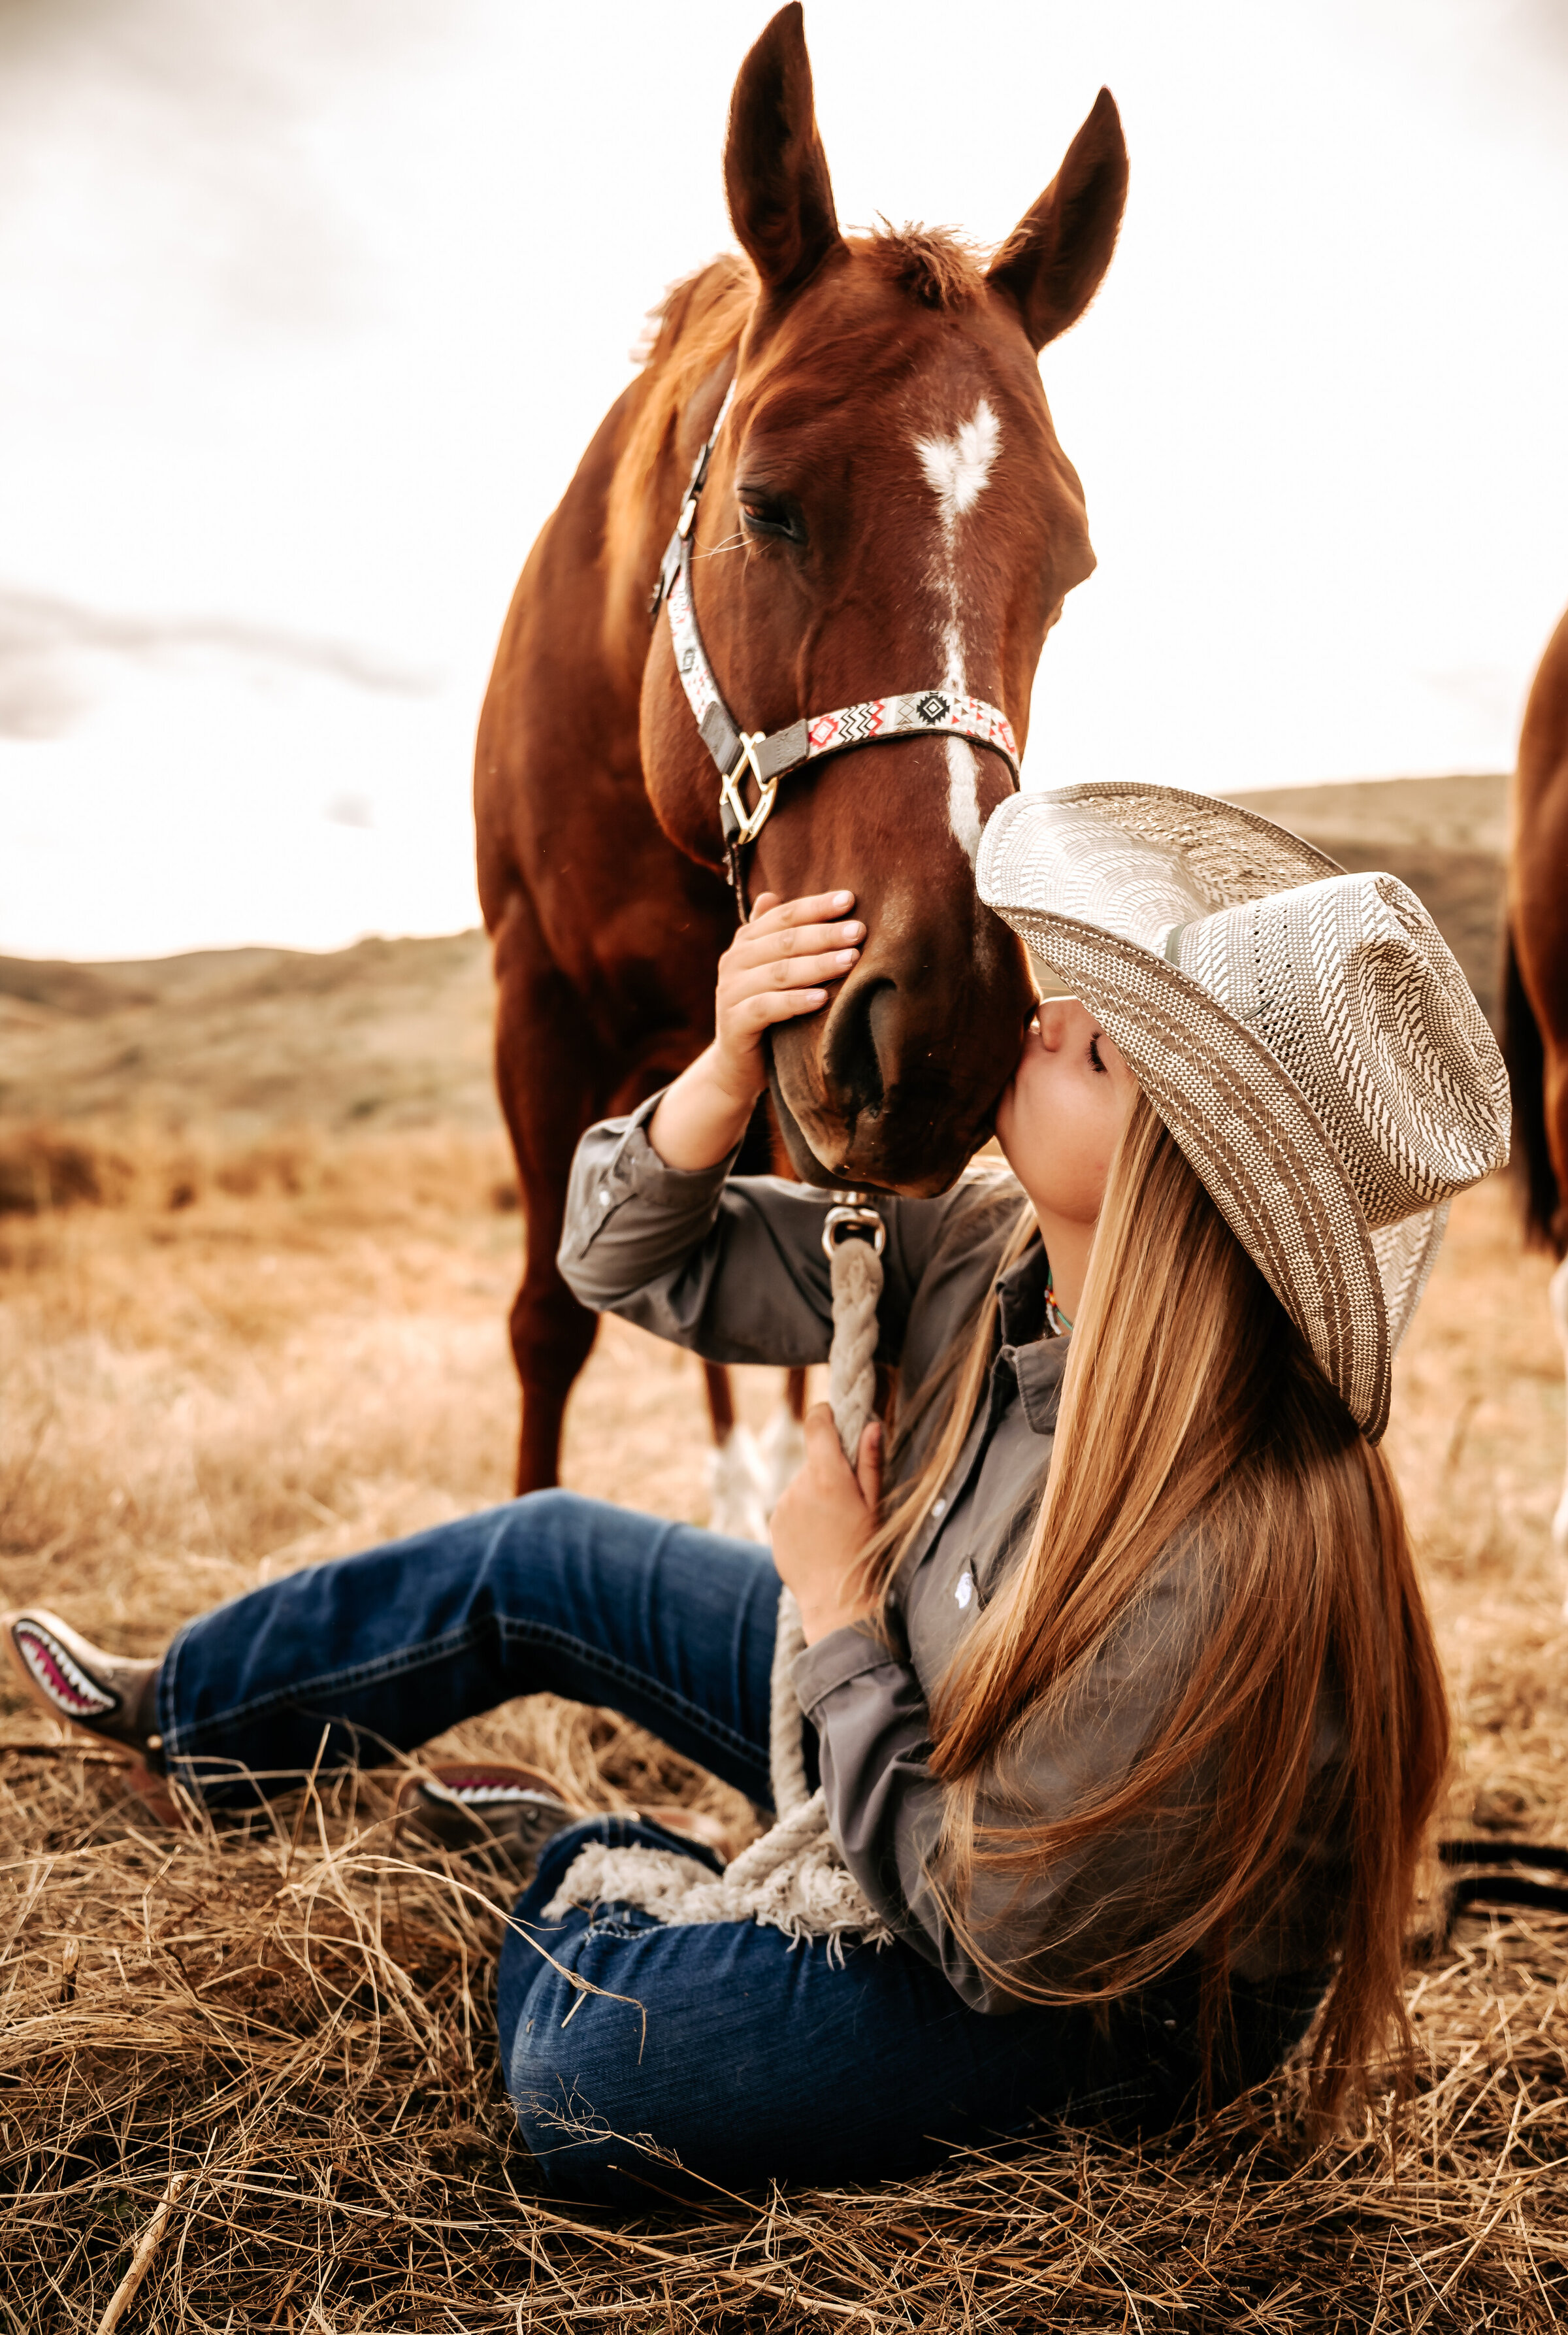 girl kisses horse on nose in senior picture